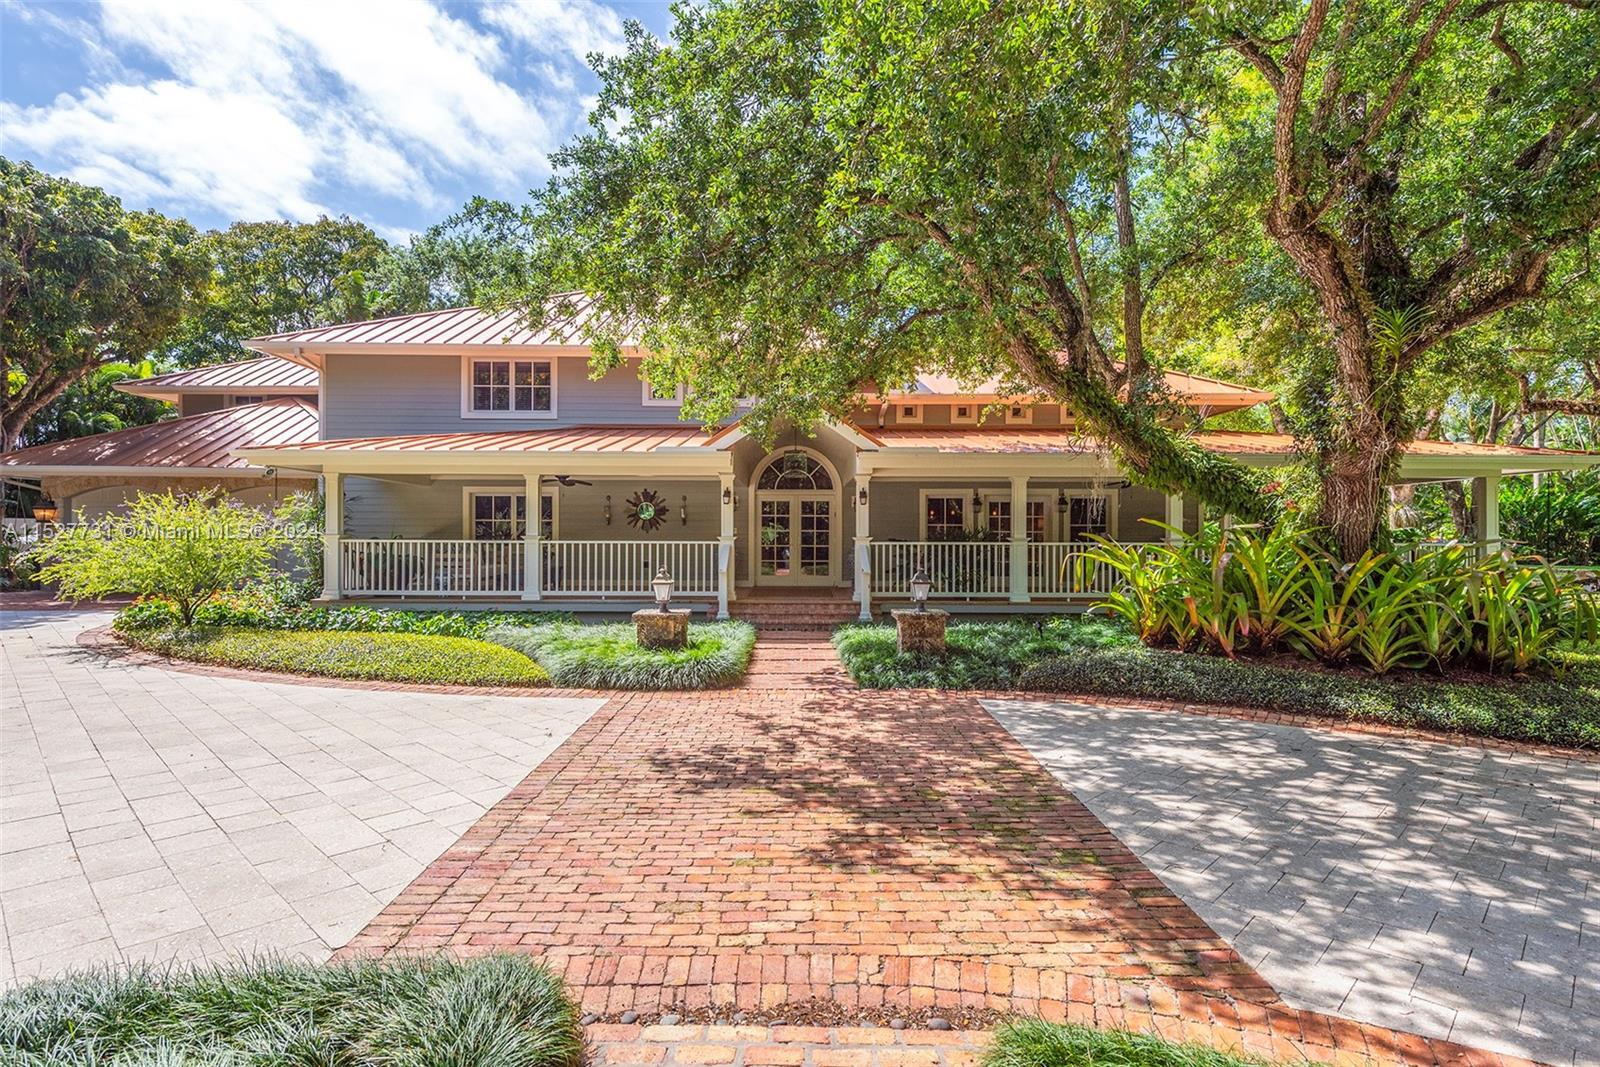 Photo of 5400 Kerwood Oaks Dr in Coral Gables, FL